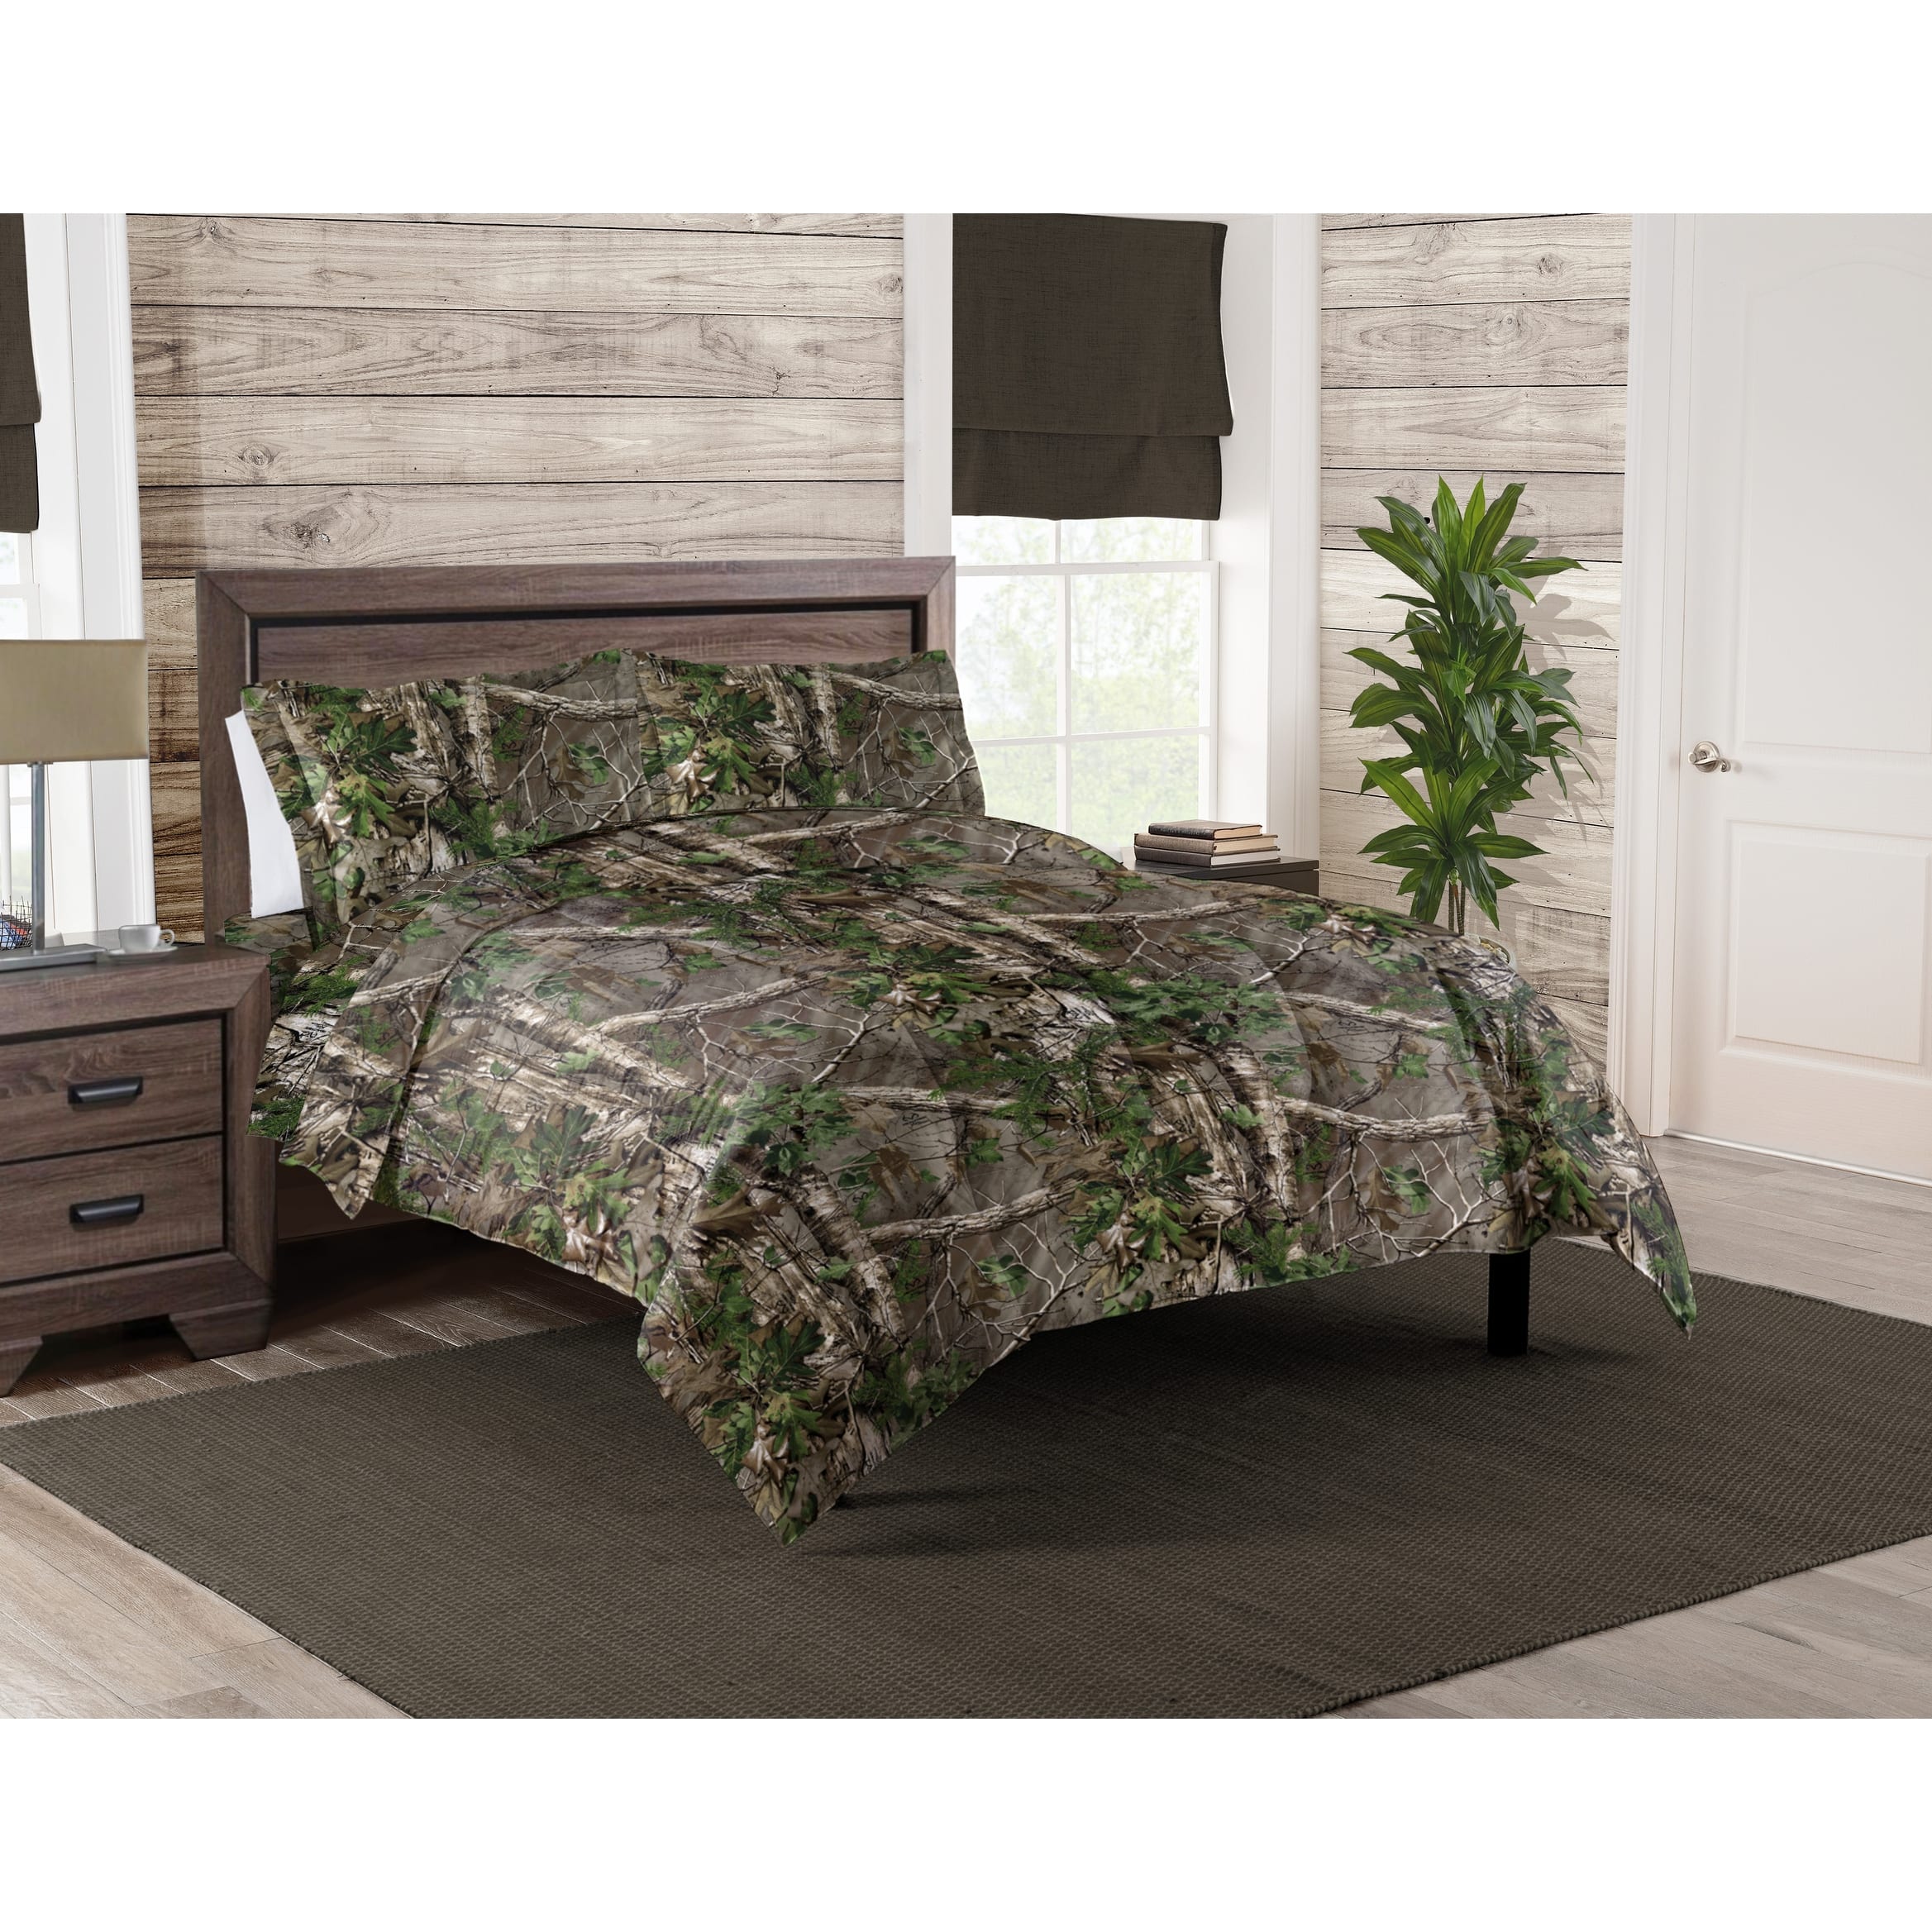 ENT 785 Realtree - Xtra Green Camo King Bed in a Bag - Bed Bath ...